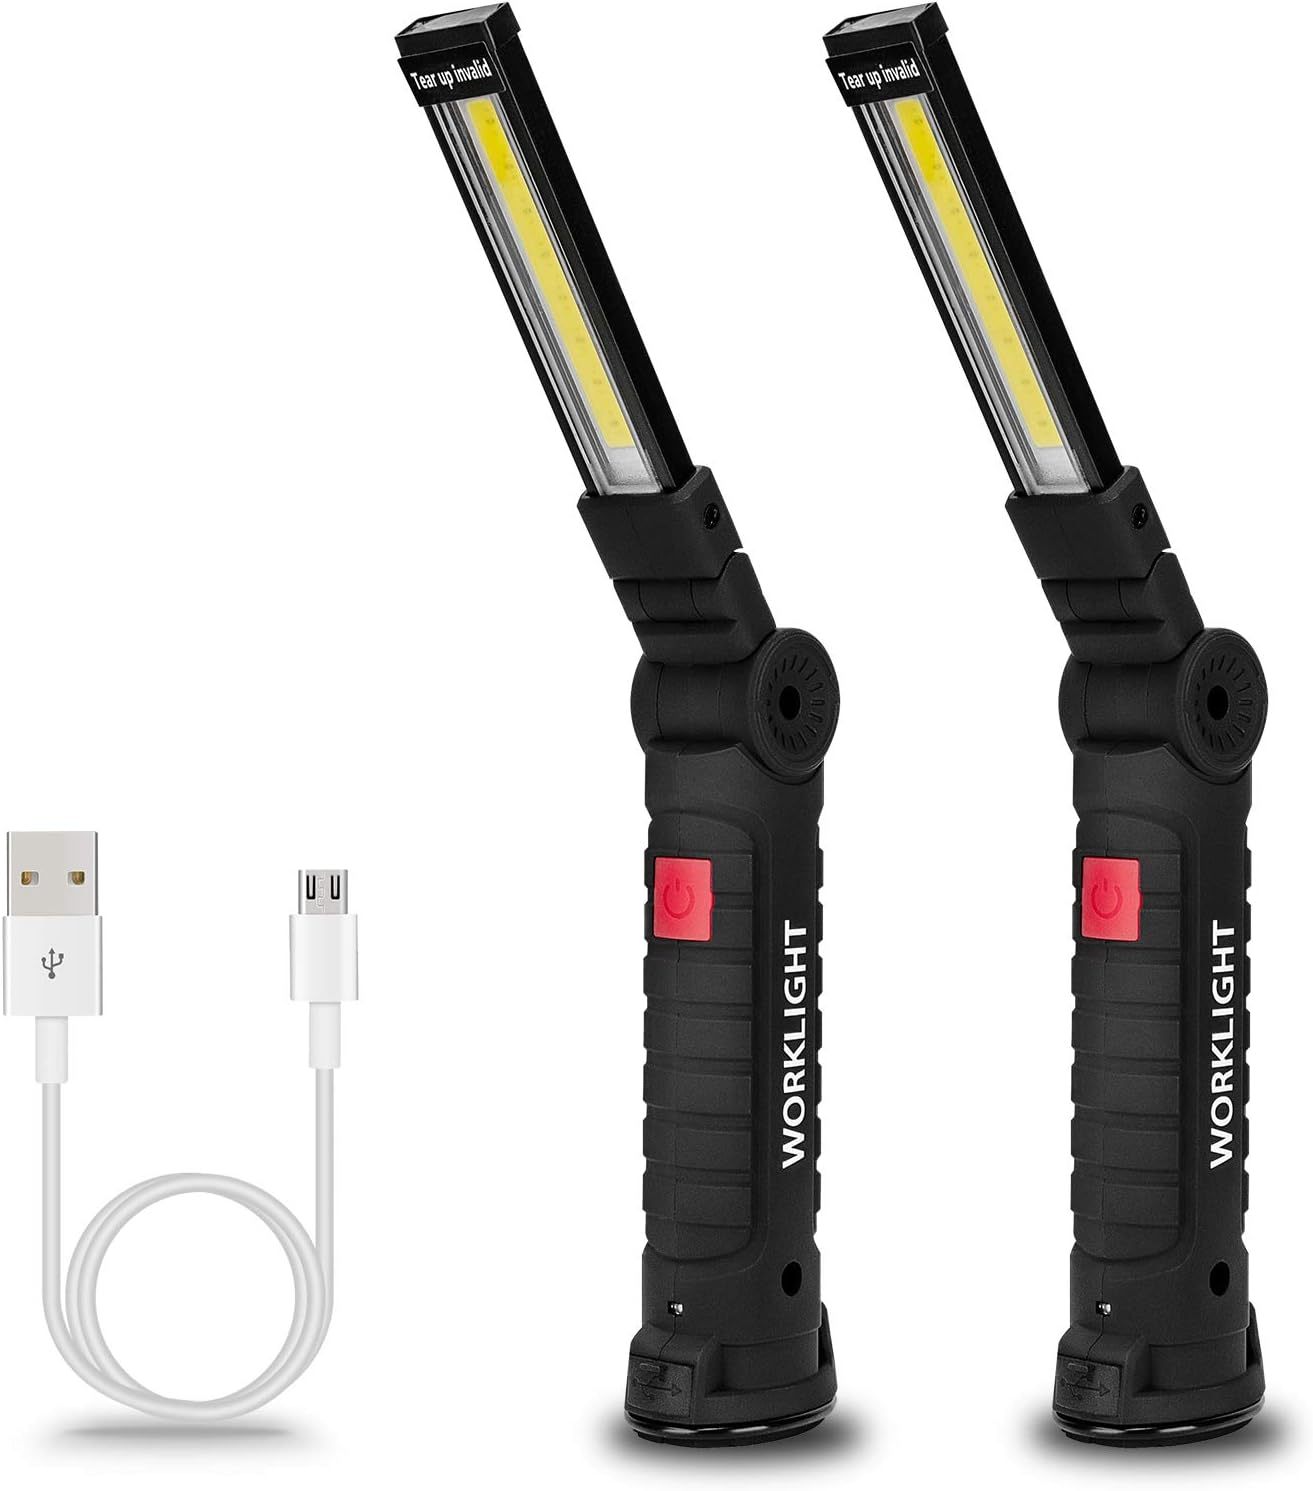 Lmaytech Gifts for Men, 2 Pack Black Rechargeable LED Work Lights with Magnetic Base